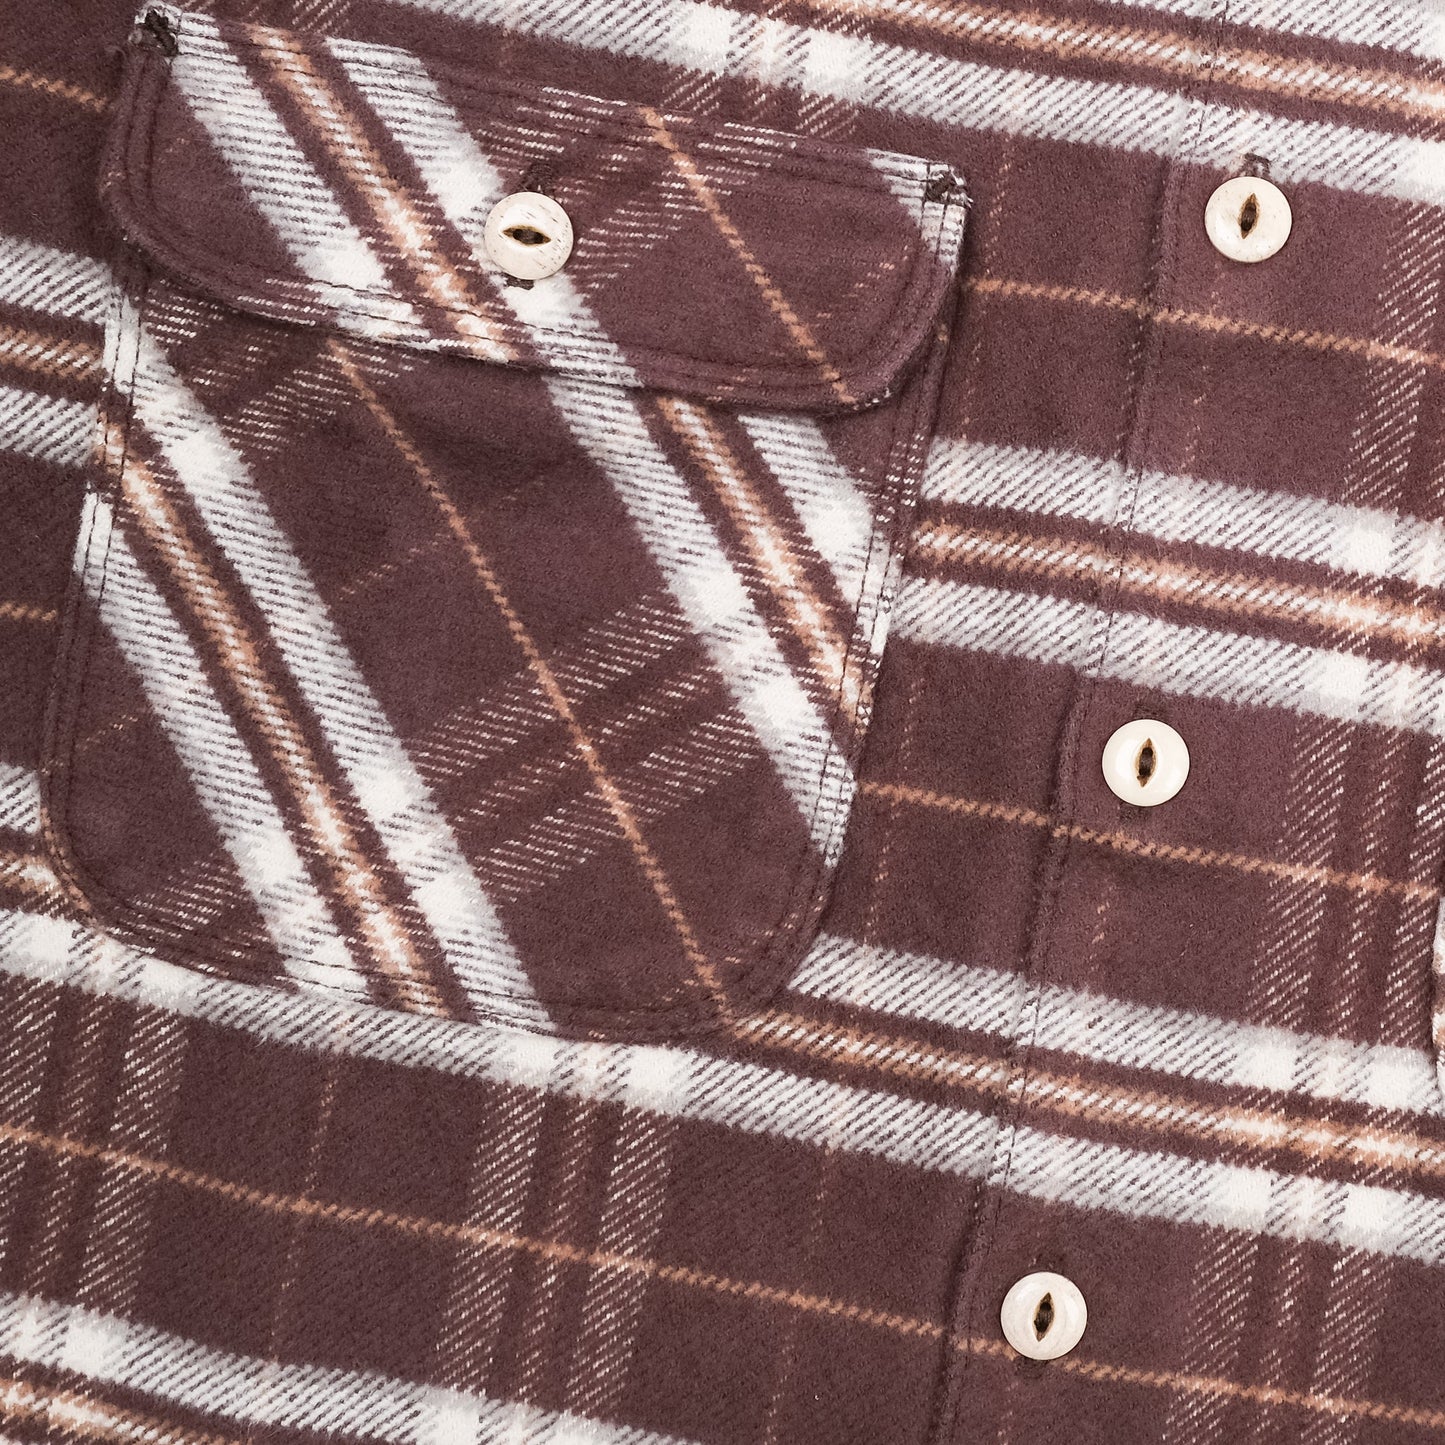 Freenote - Benson Grizzly Flannel